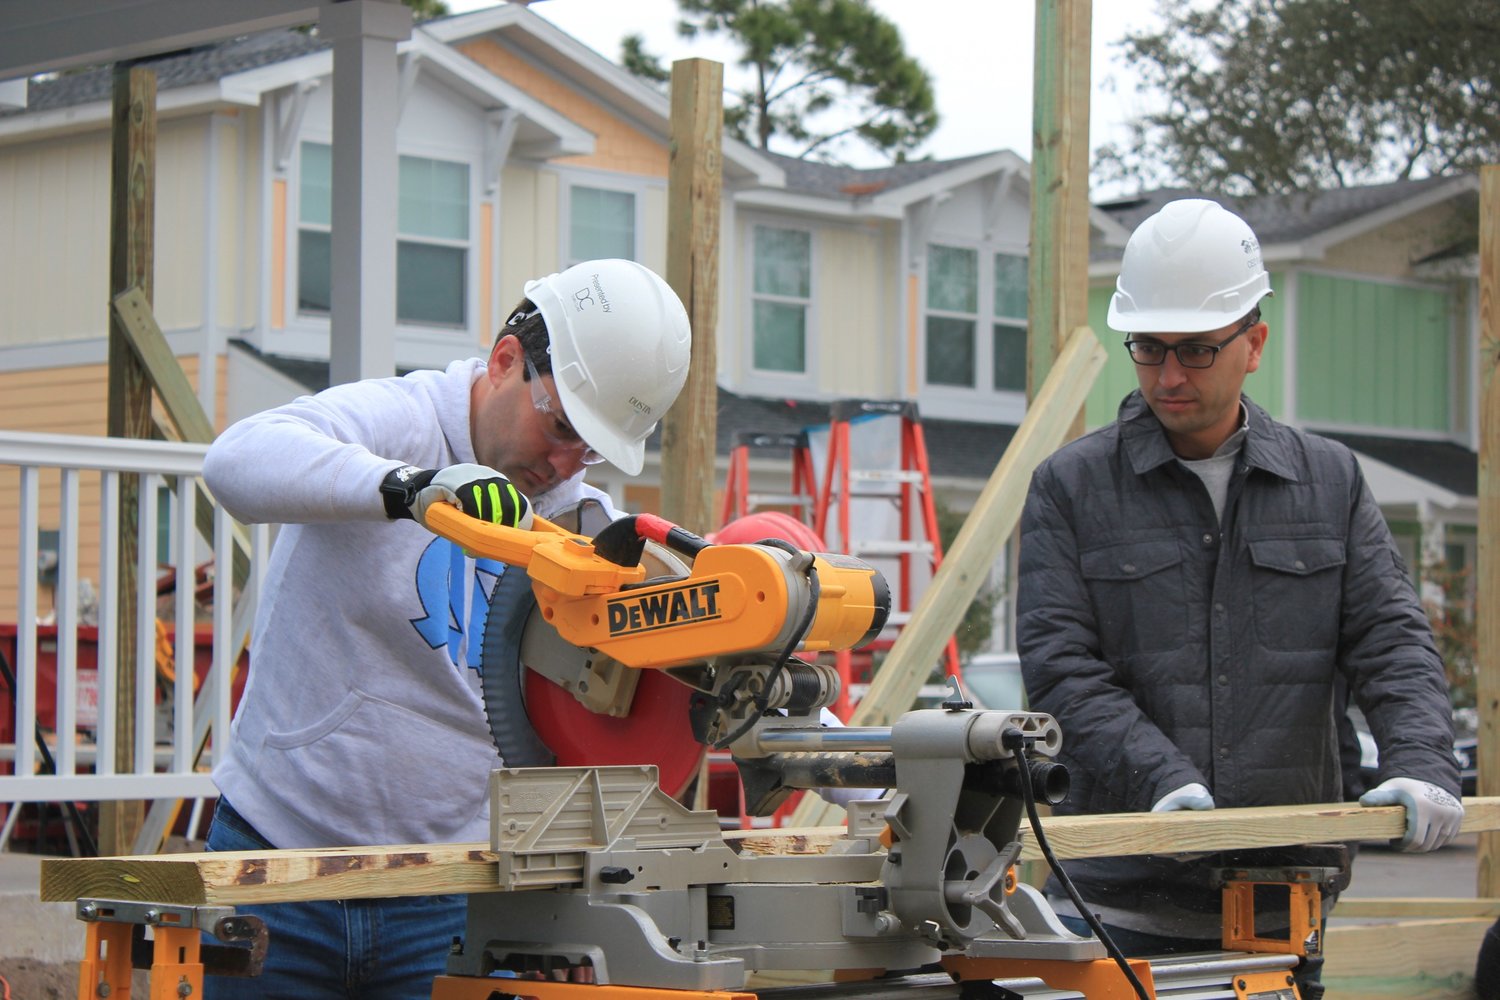 A team of 24 top executives in Jacksonville took part in Beaches Habitat’s third annual CEO Build event on Jan. 28. They helped to build four homes.